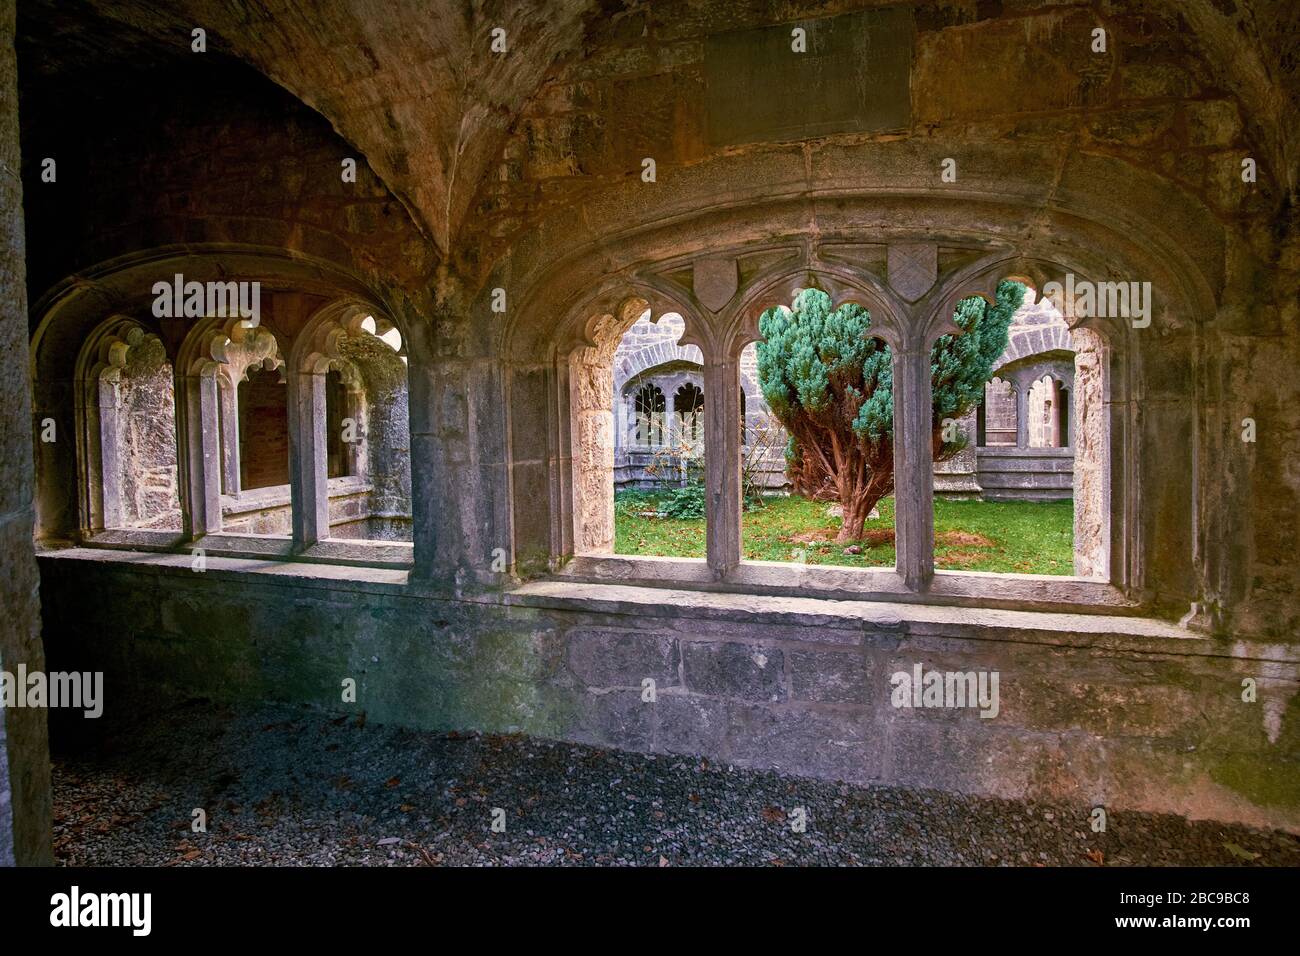 Gortaganniv, Gortaganniff, Co. Clare, Ireland - 10/26/2018: Old Augustinian Friary East of Adare, Ireland. Courtyard seen through arches from walkway. Stock Photo